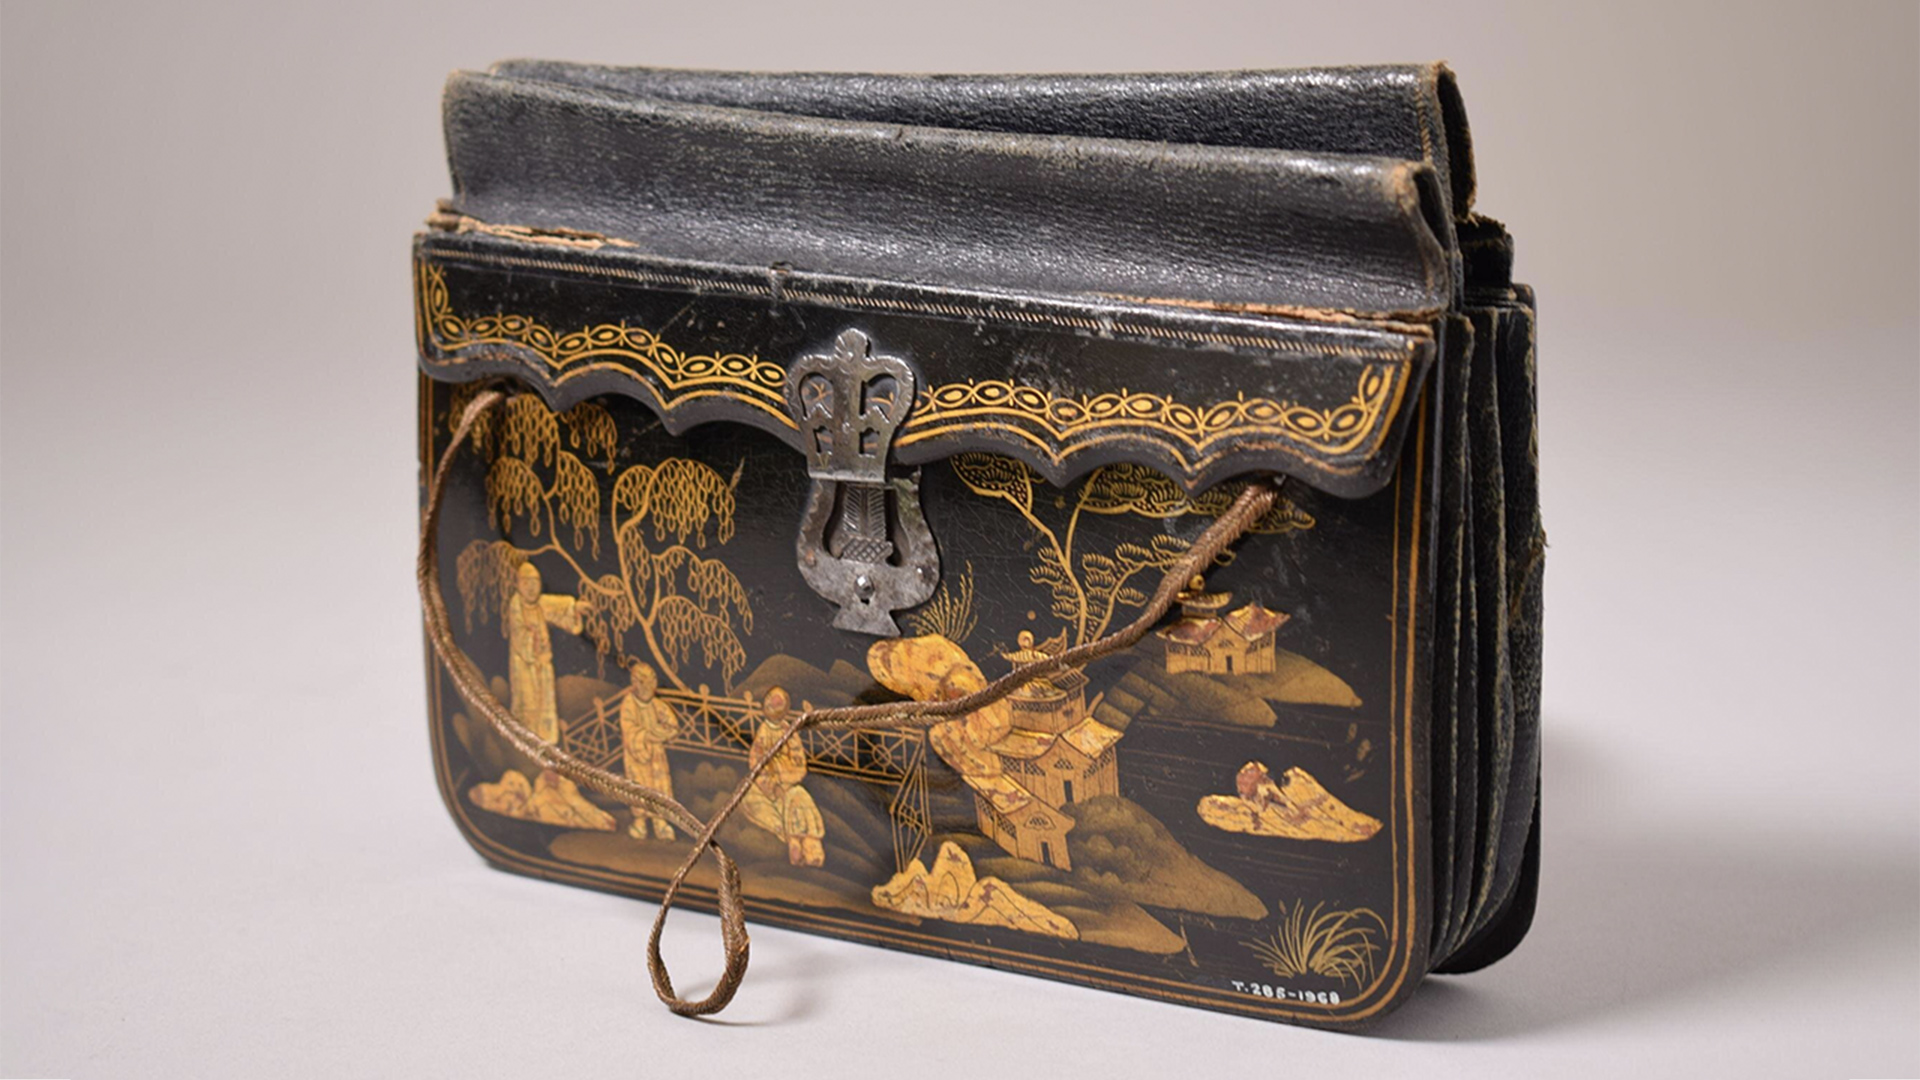 Black leather handbag with a garden in gold